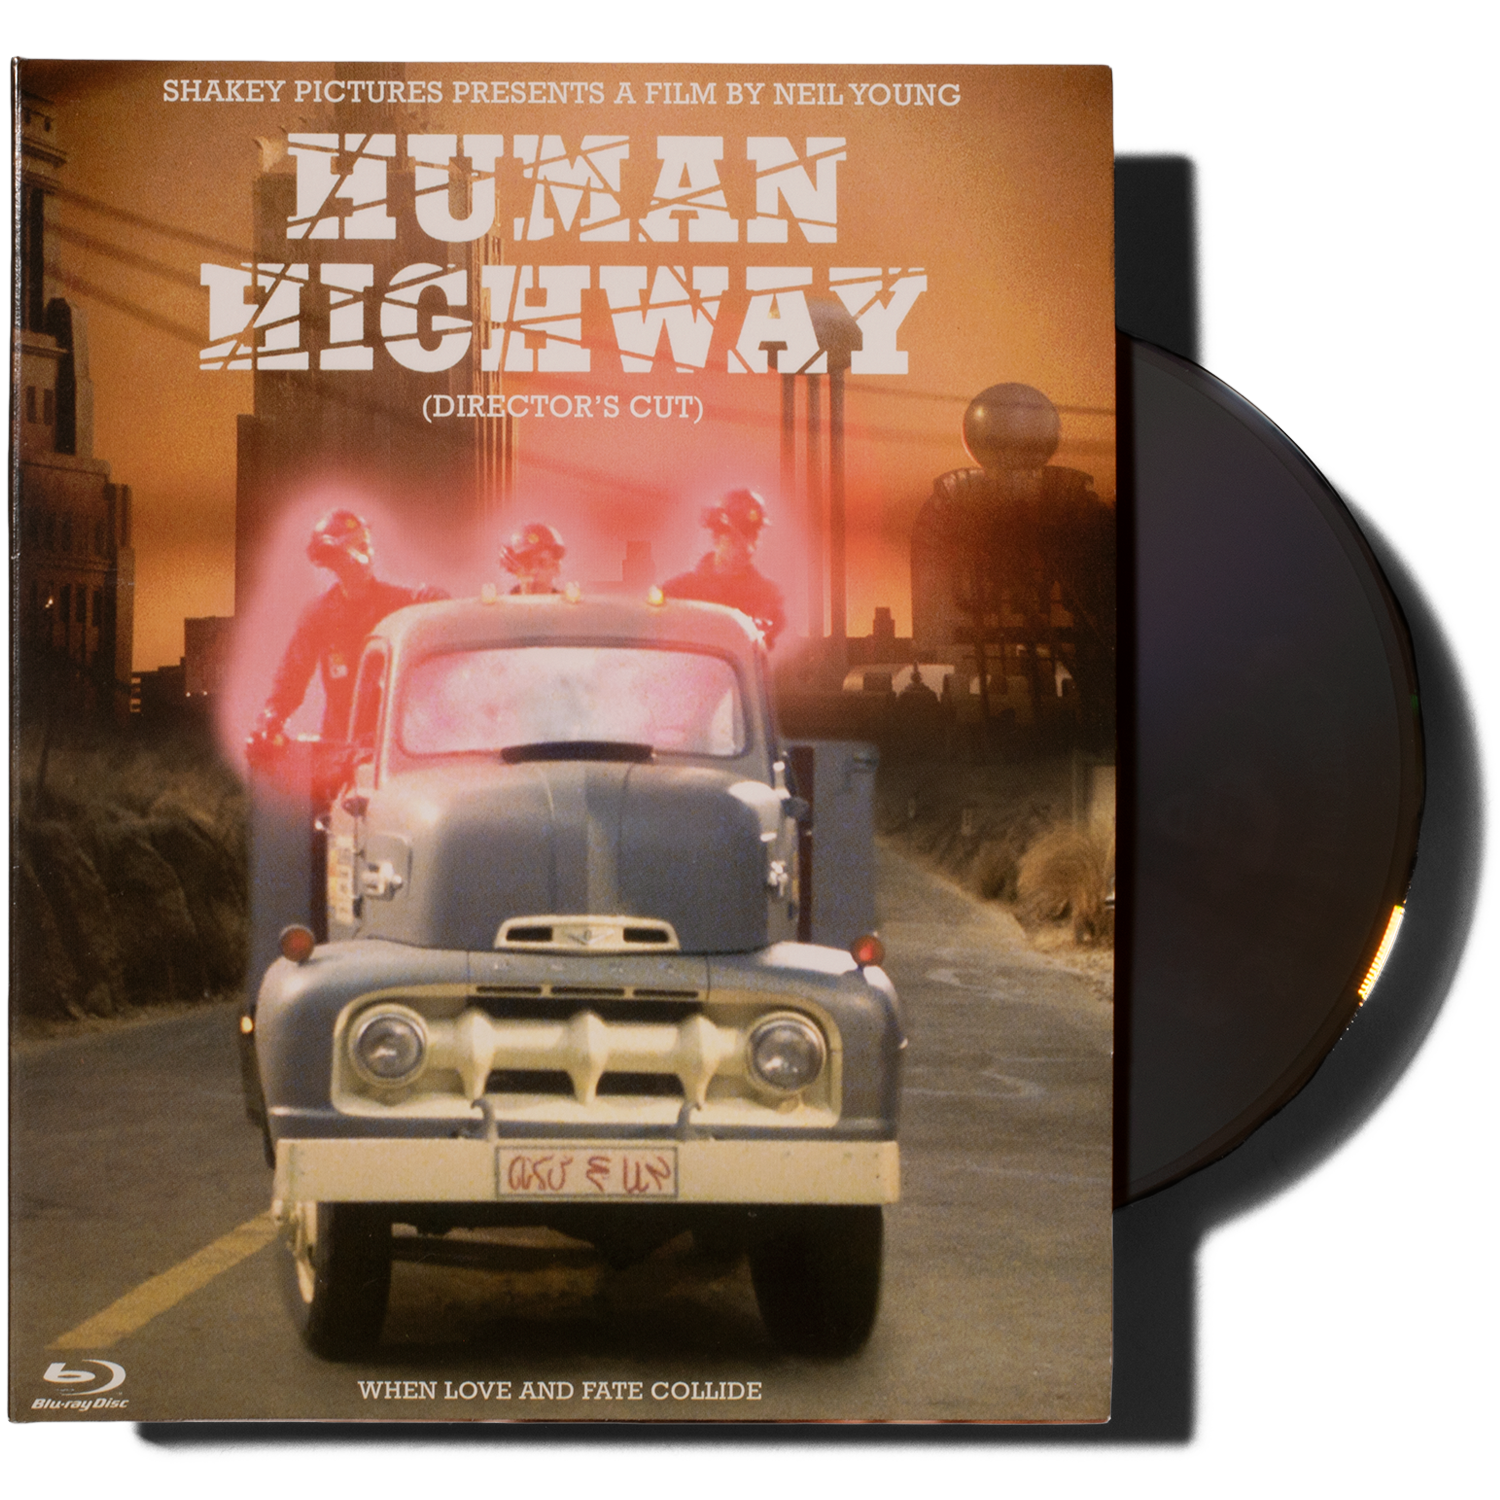 Human Highway (Director's Cut) Blu-Ray | Neil Young US Official Store